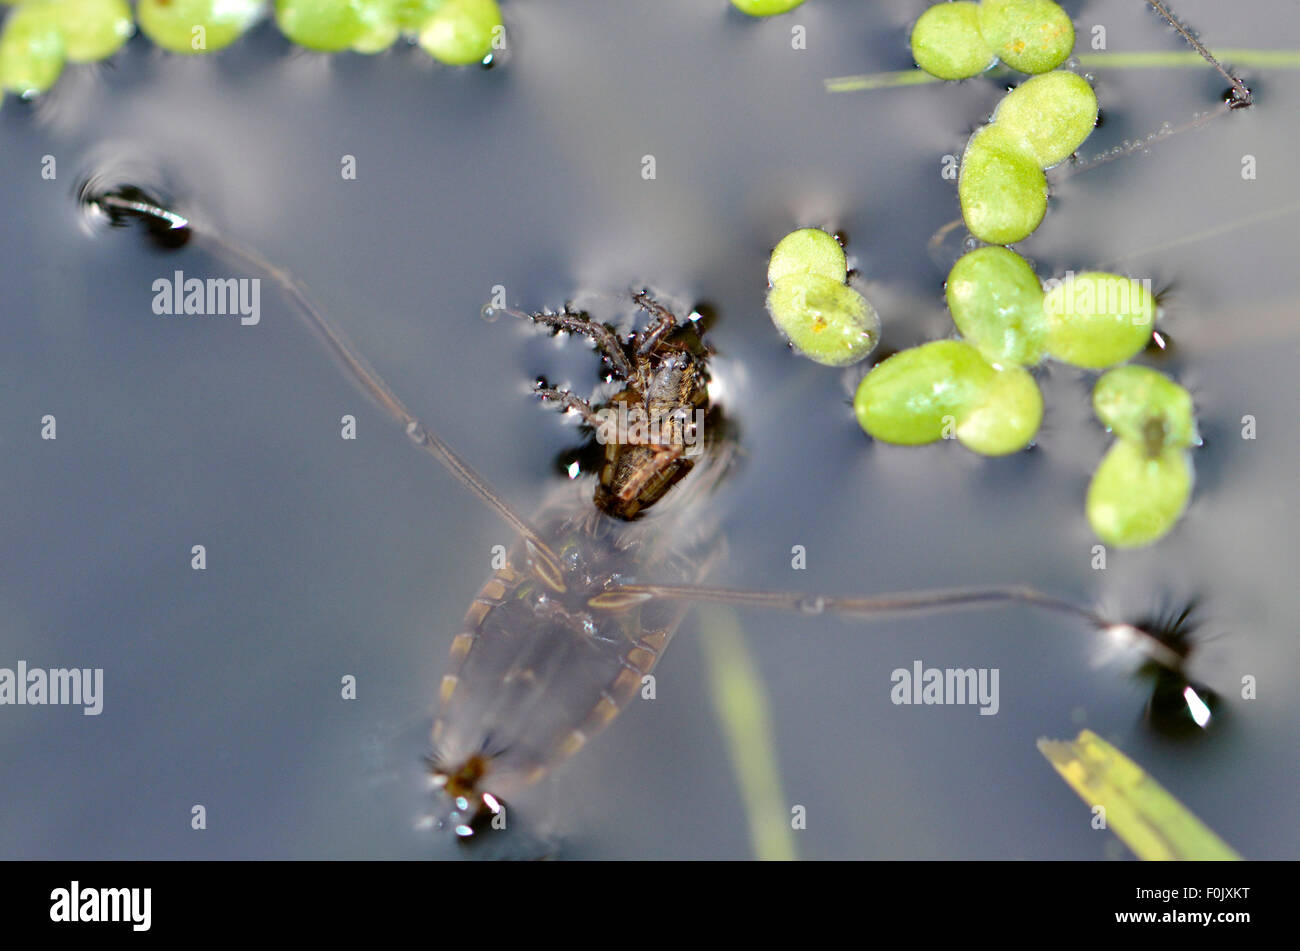 Common Backswimmer (Notonecta glauca) commonly called Water Boatman, feeding on a spider which fell into a garden pond Stock Photo